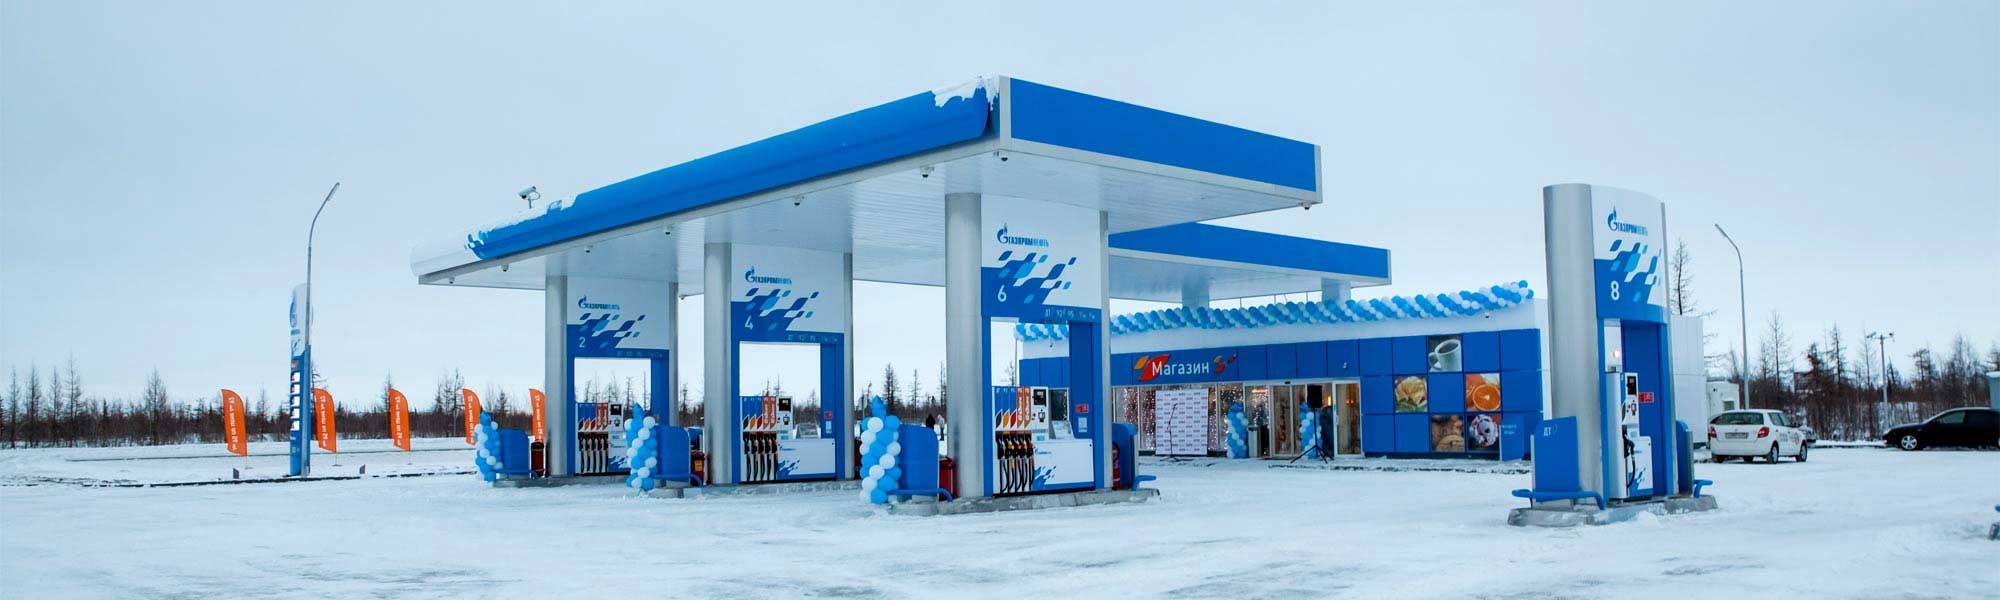 Fuel station in Russia